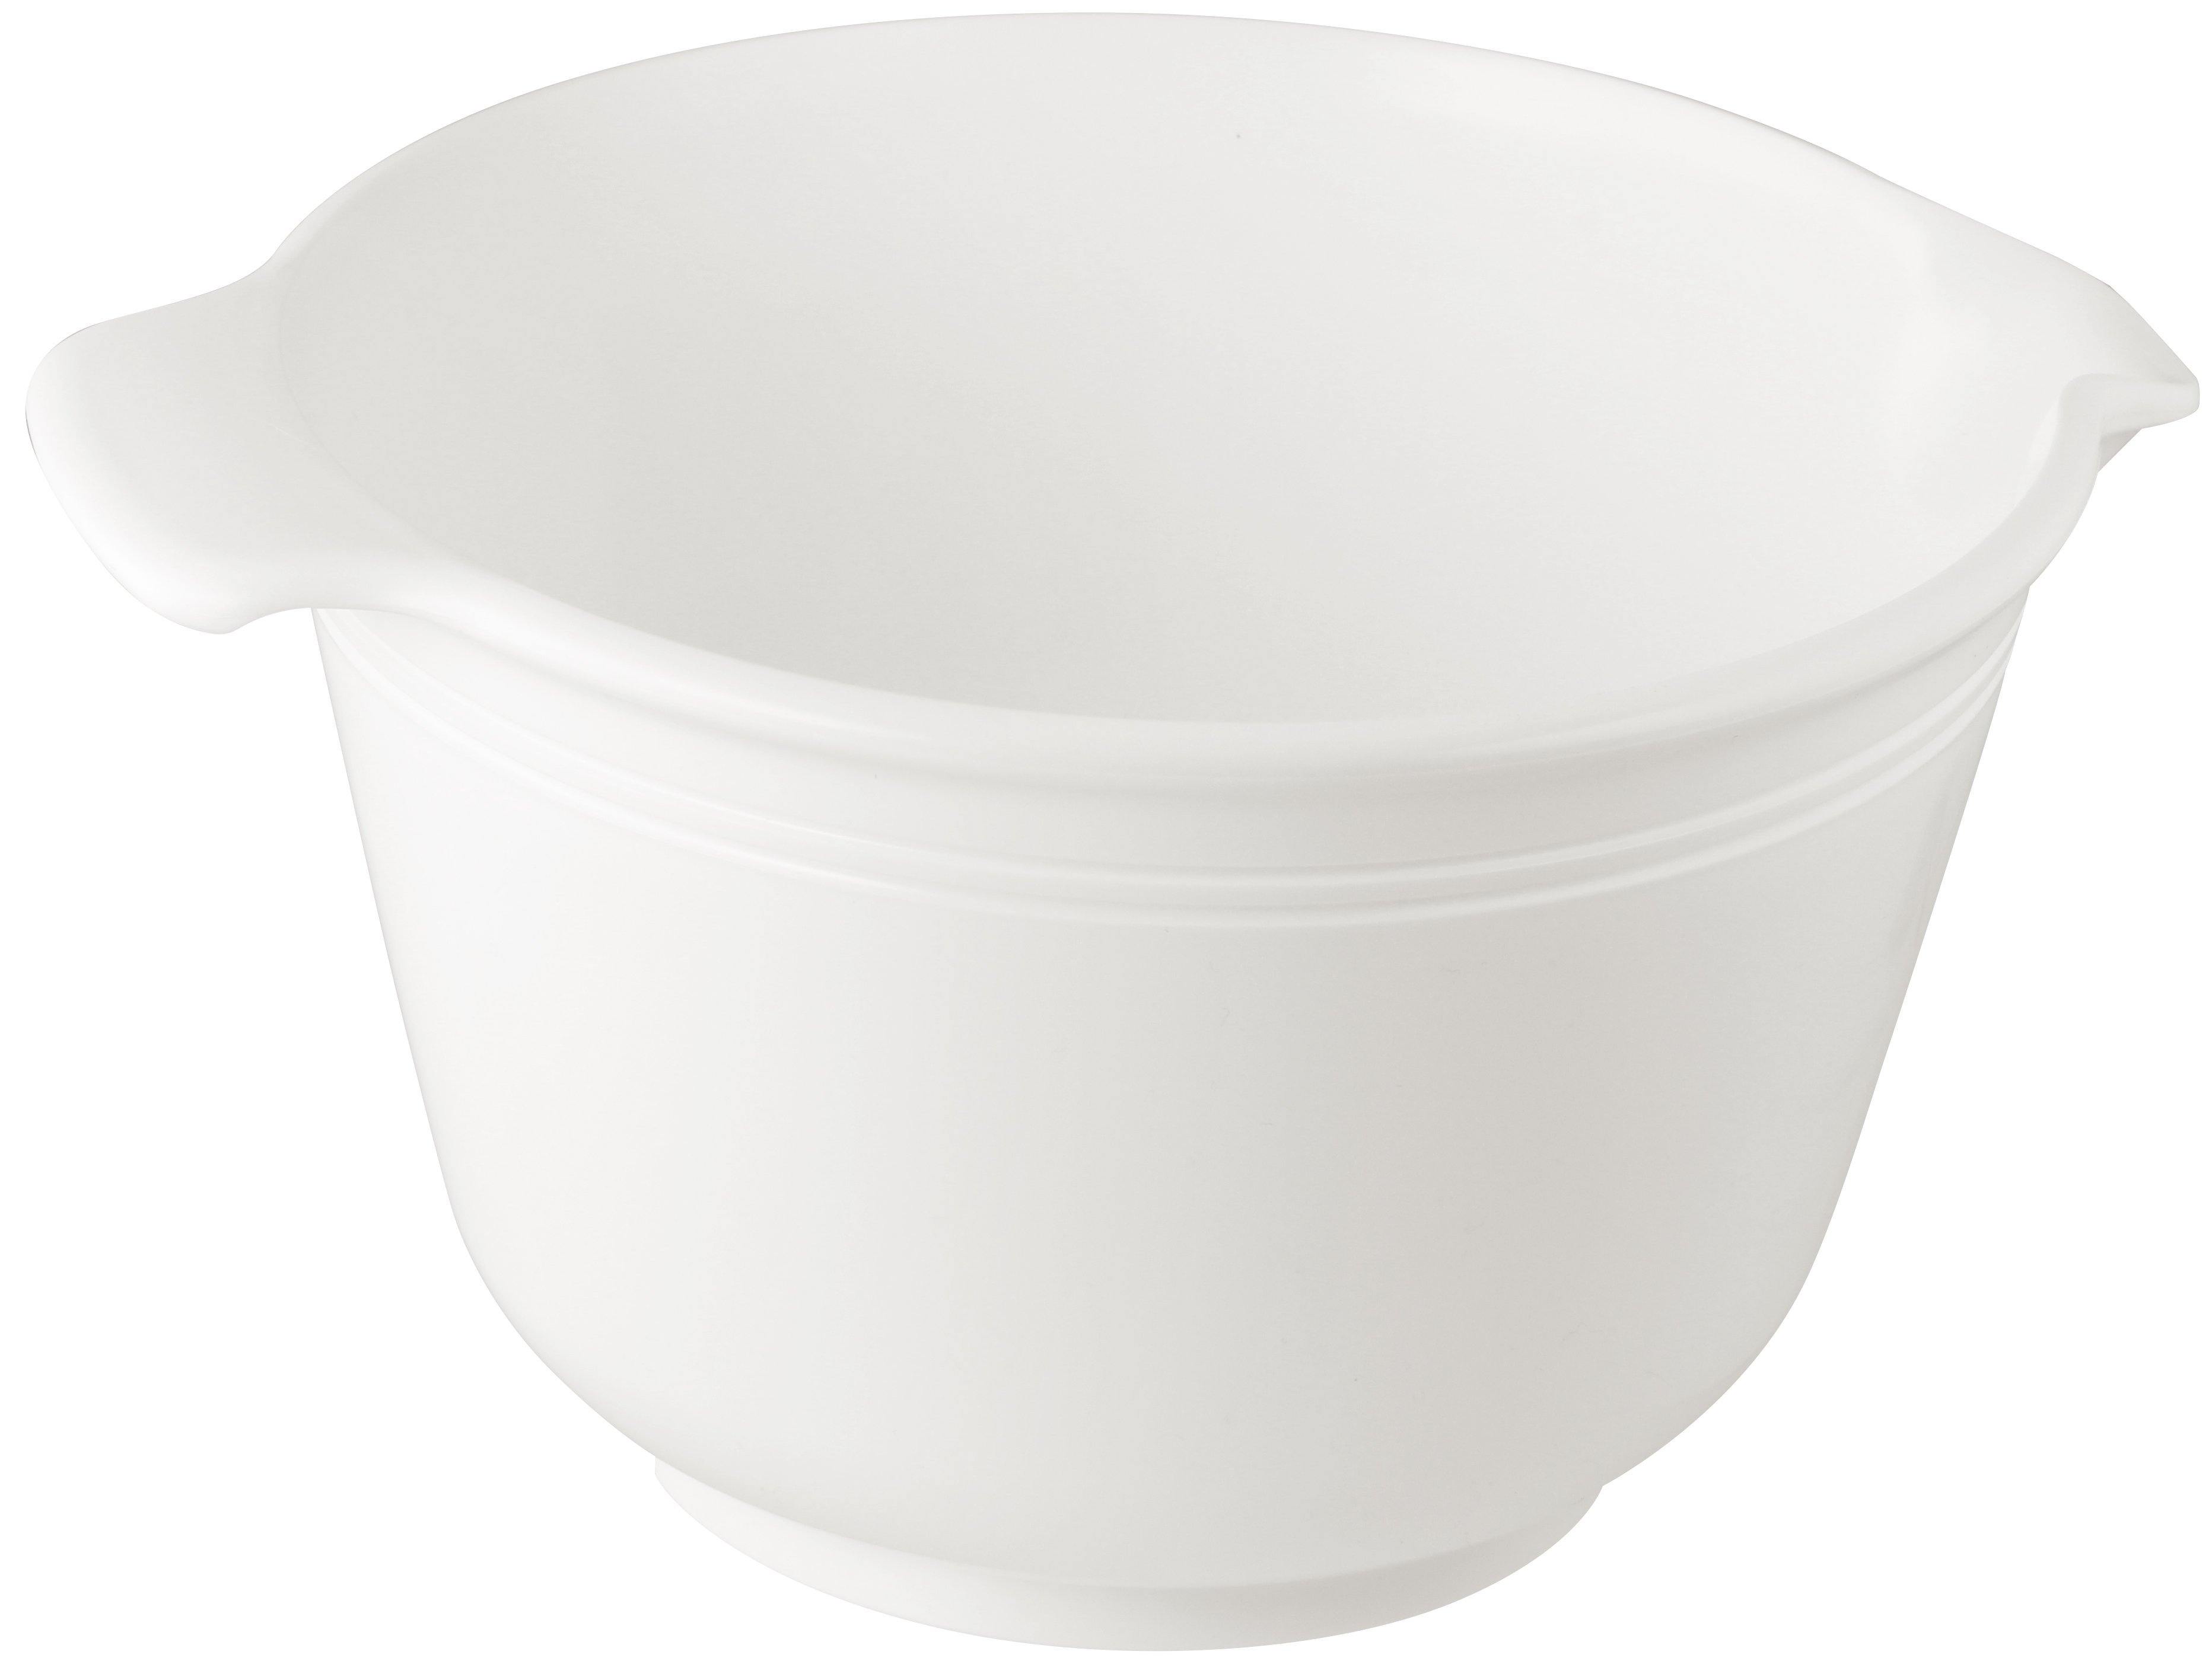 Dr. Oetker Mixing Bowl, White, 21X14 Cm, 2.5L - Whole and All